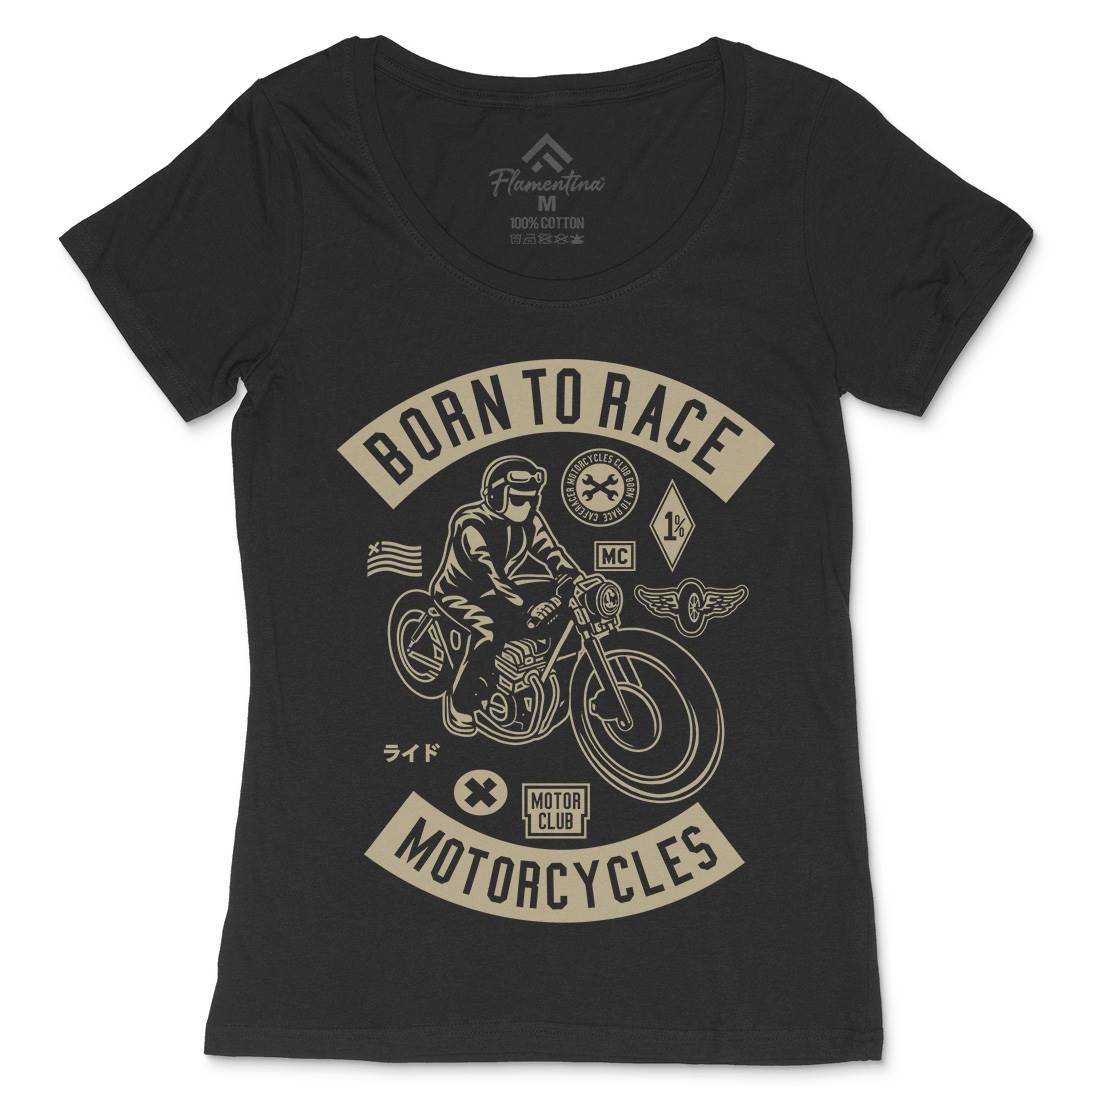 Born To Race Womens Scoop Neck T-Shirt Motorcycles A210